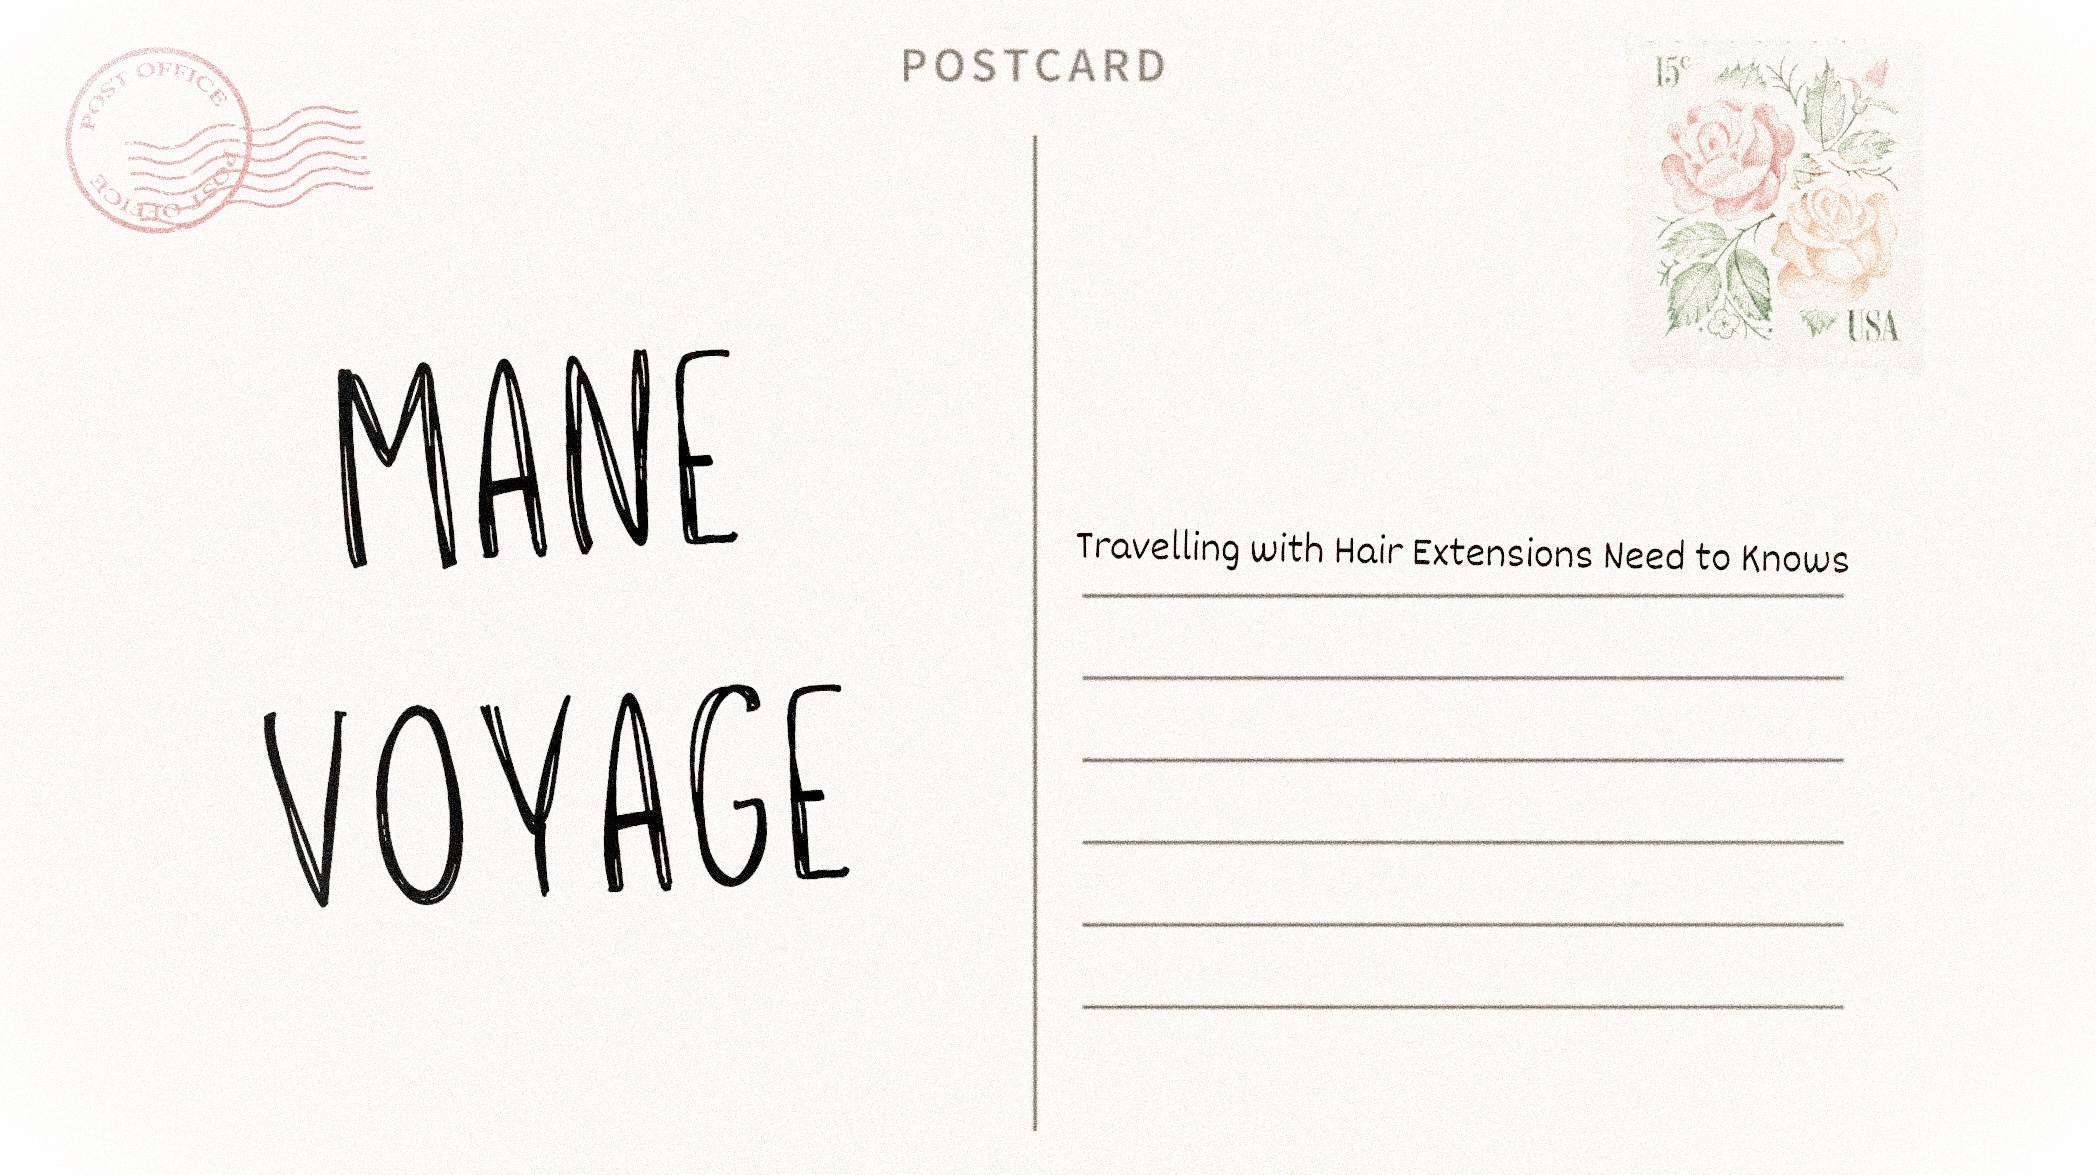 Mane Voyage: Traveling with Hair Extensions The Need to Knows